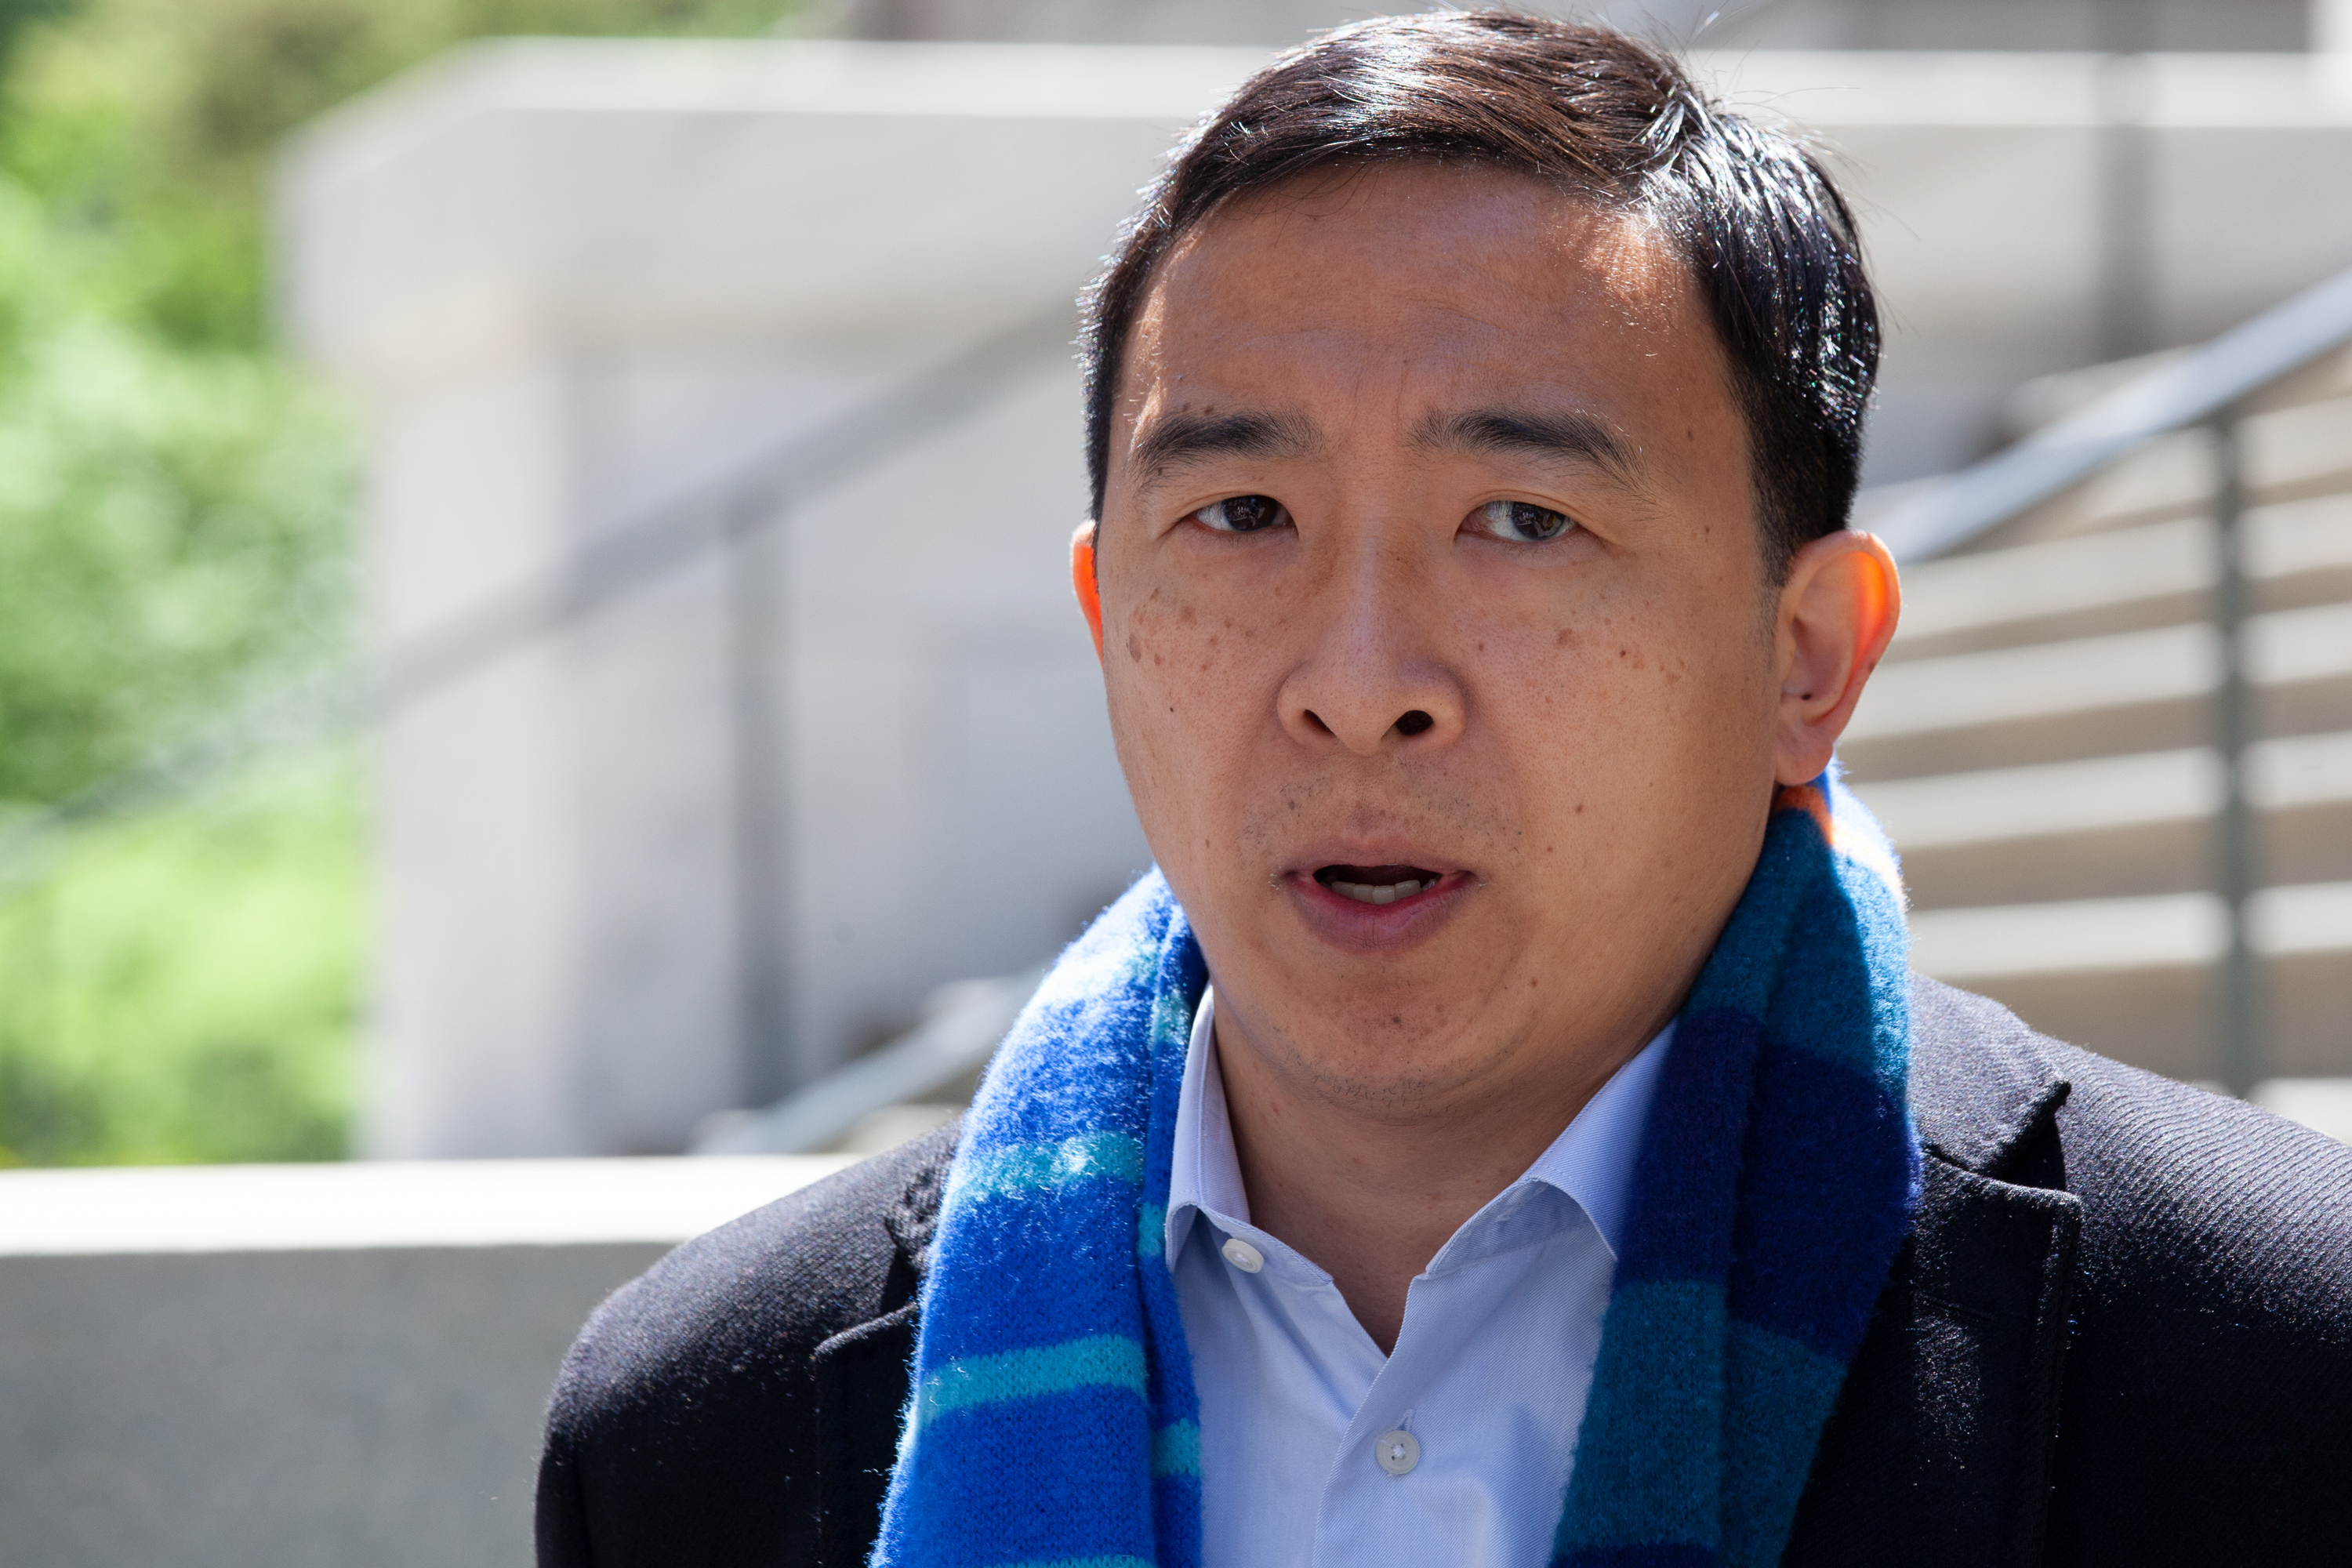 Mayoral candidate Andrew Yang advocates for reopening city schools during a press conference in front of Department of Education headquarters, May 11, 2021.